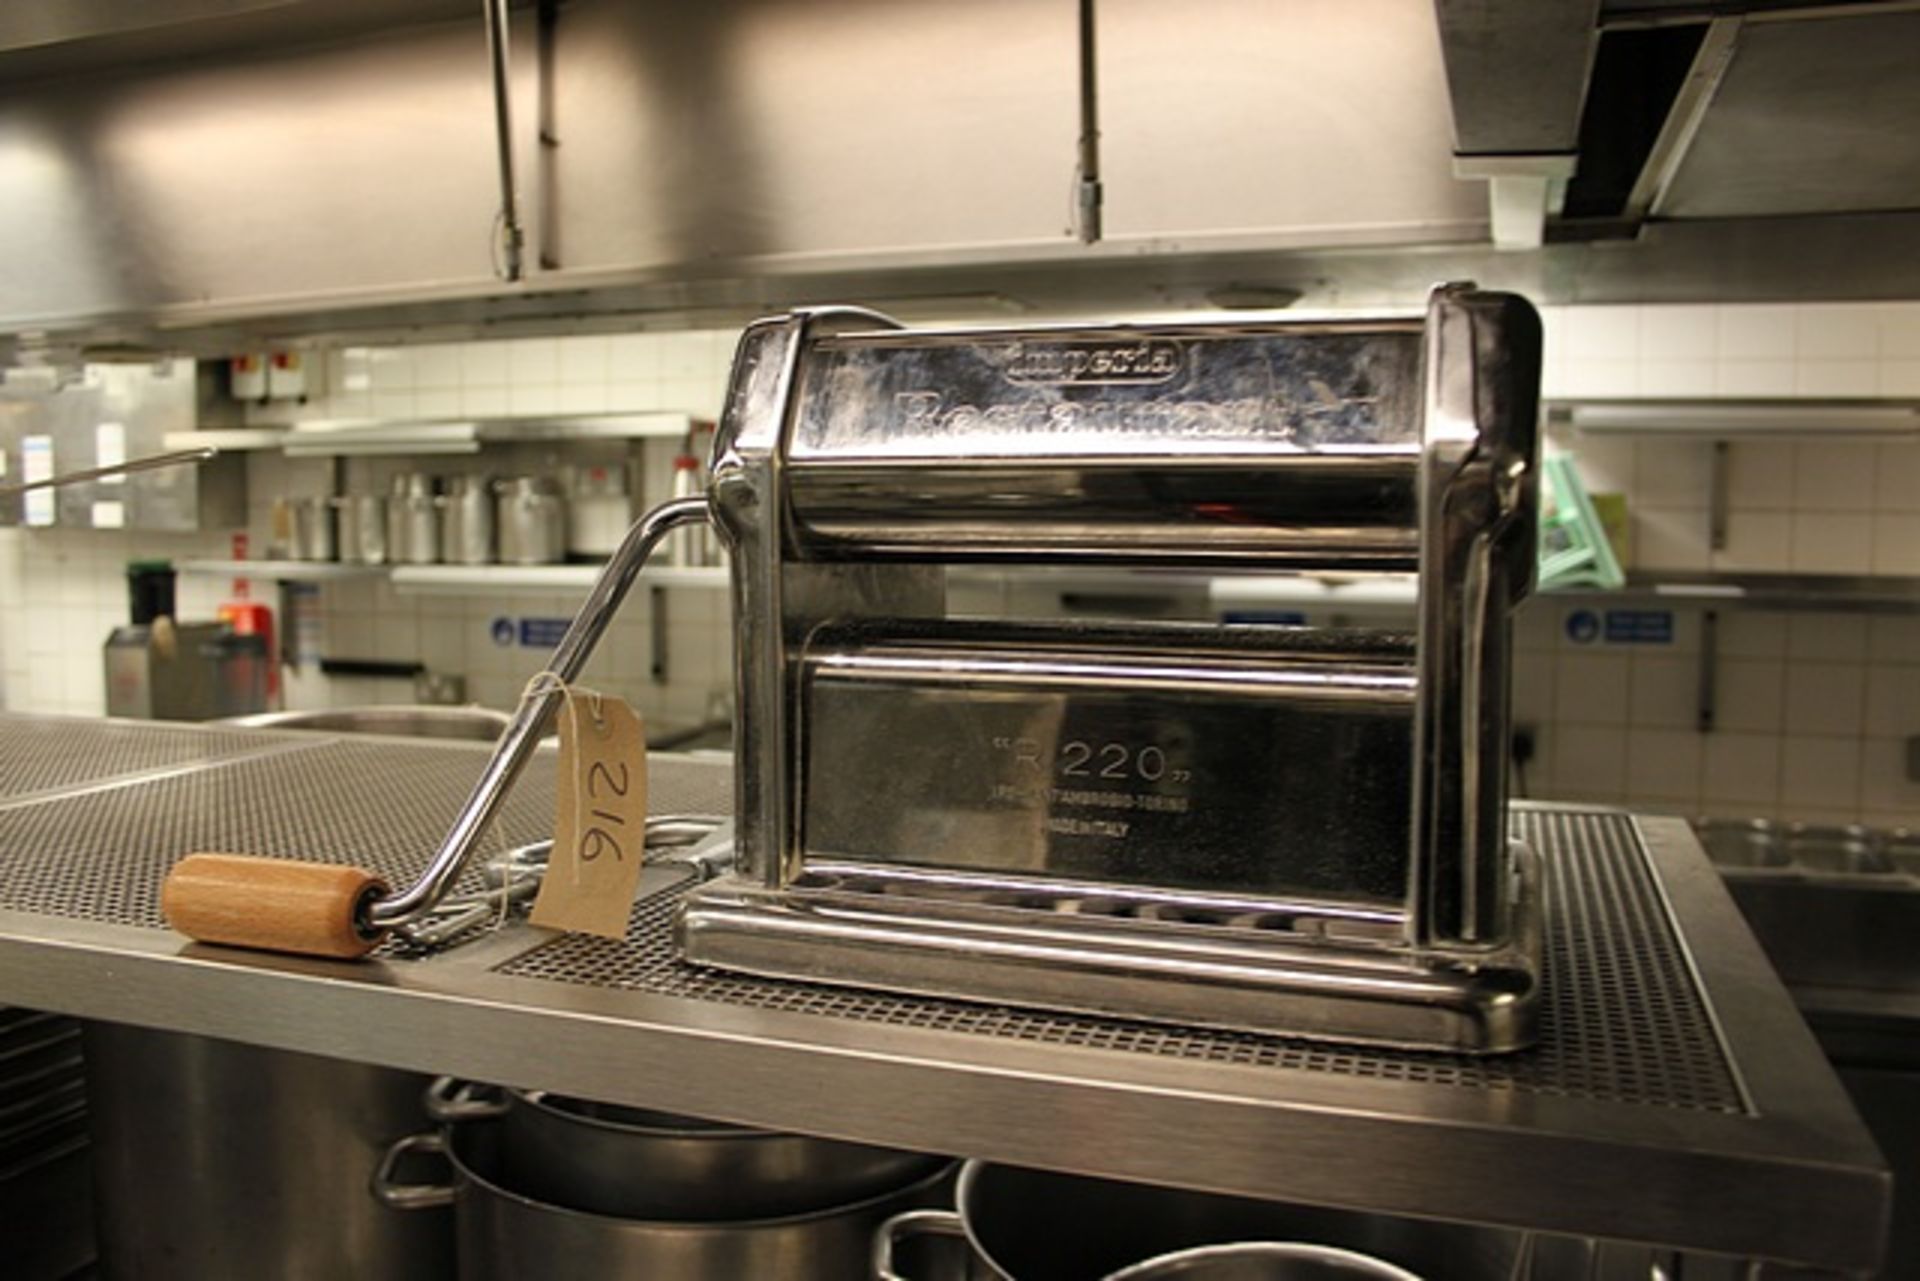 Imperia Restaurant Pasta Machine Manual R220 Produces 9" wide sheets of pasta, with a maximum